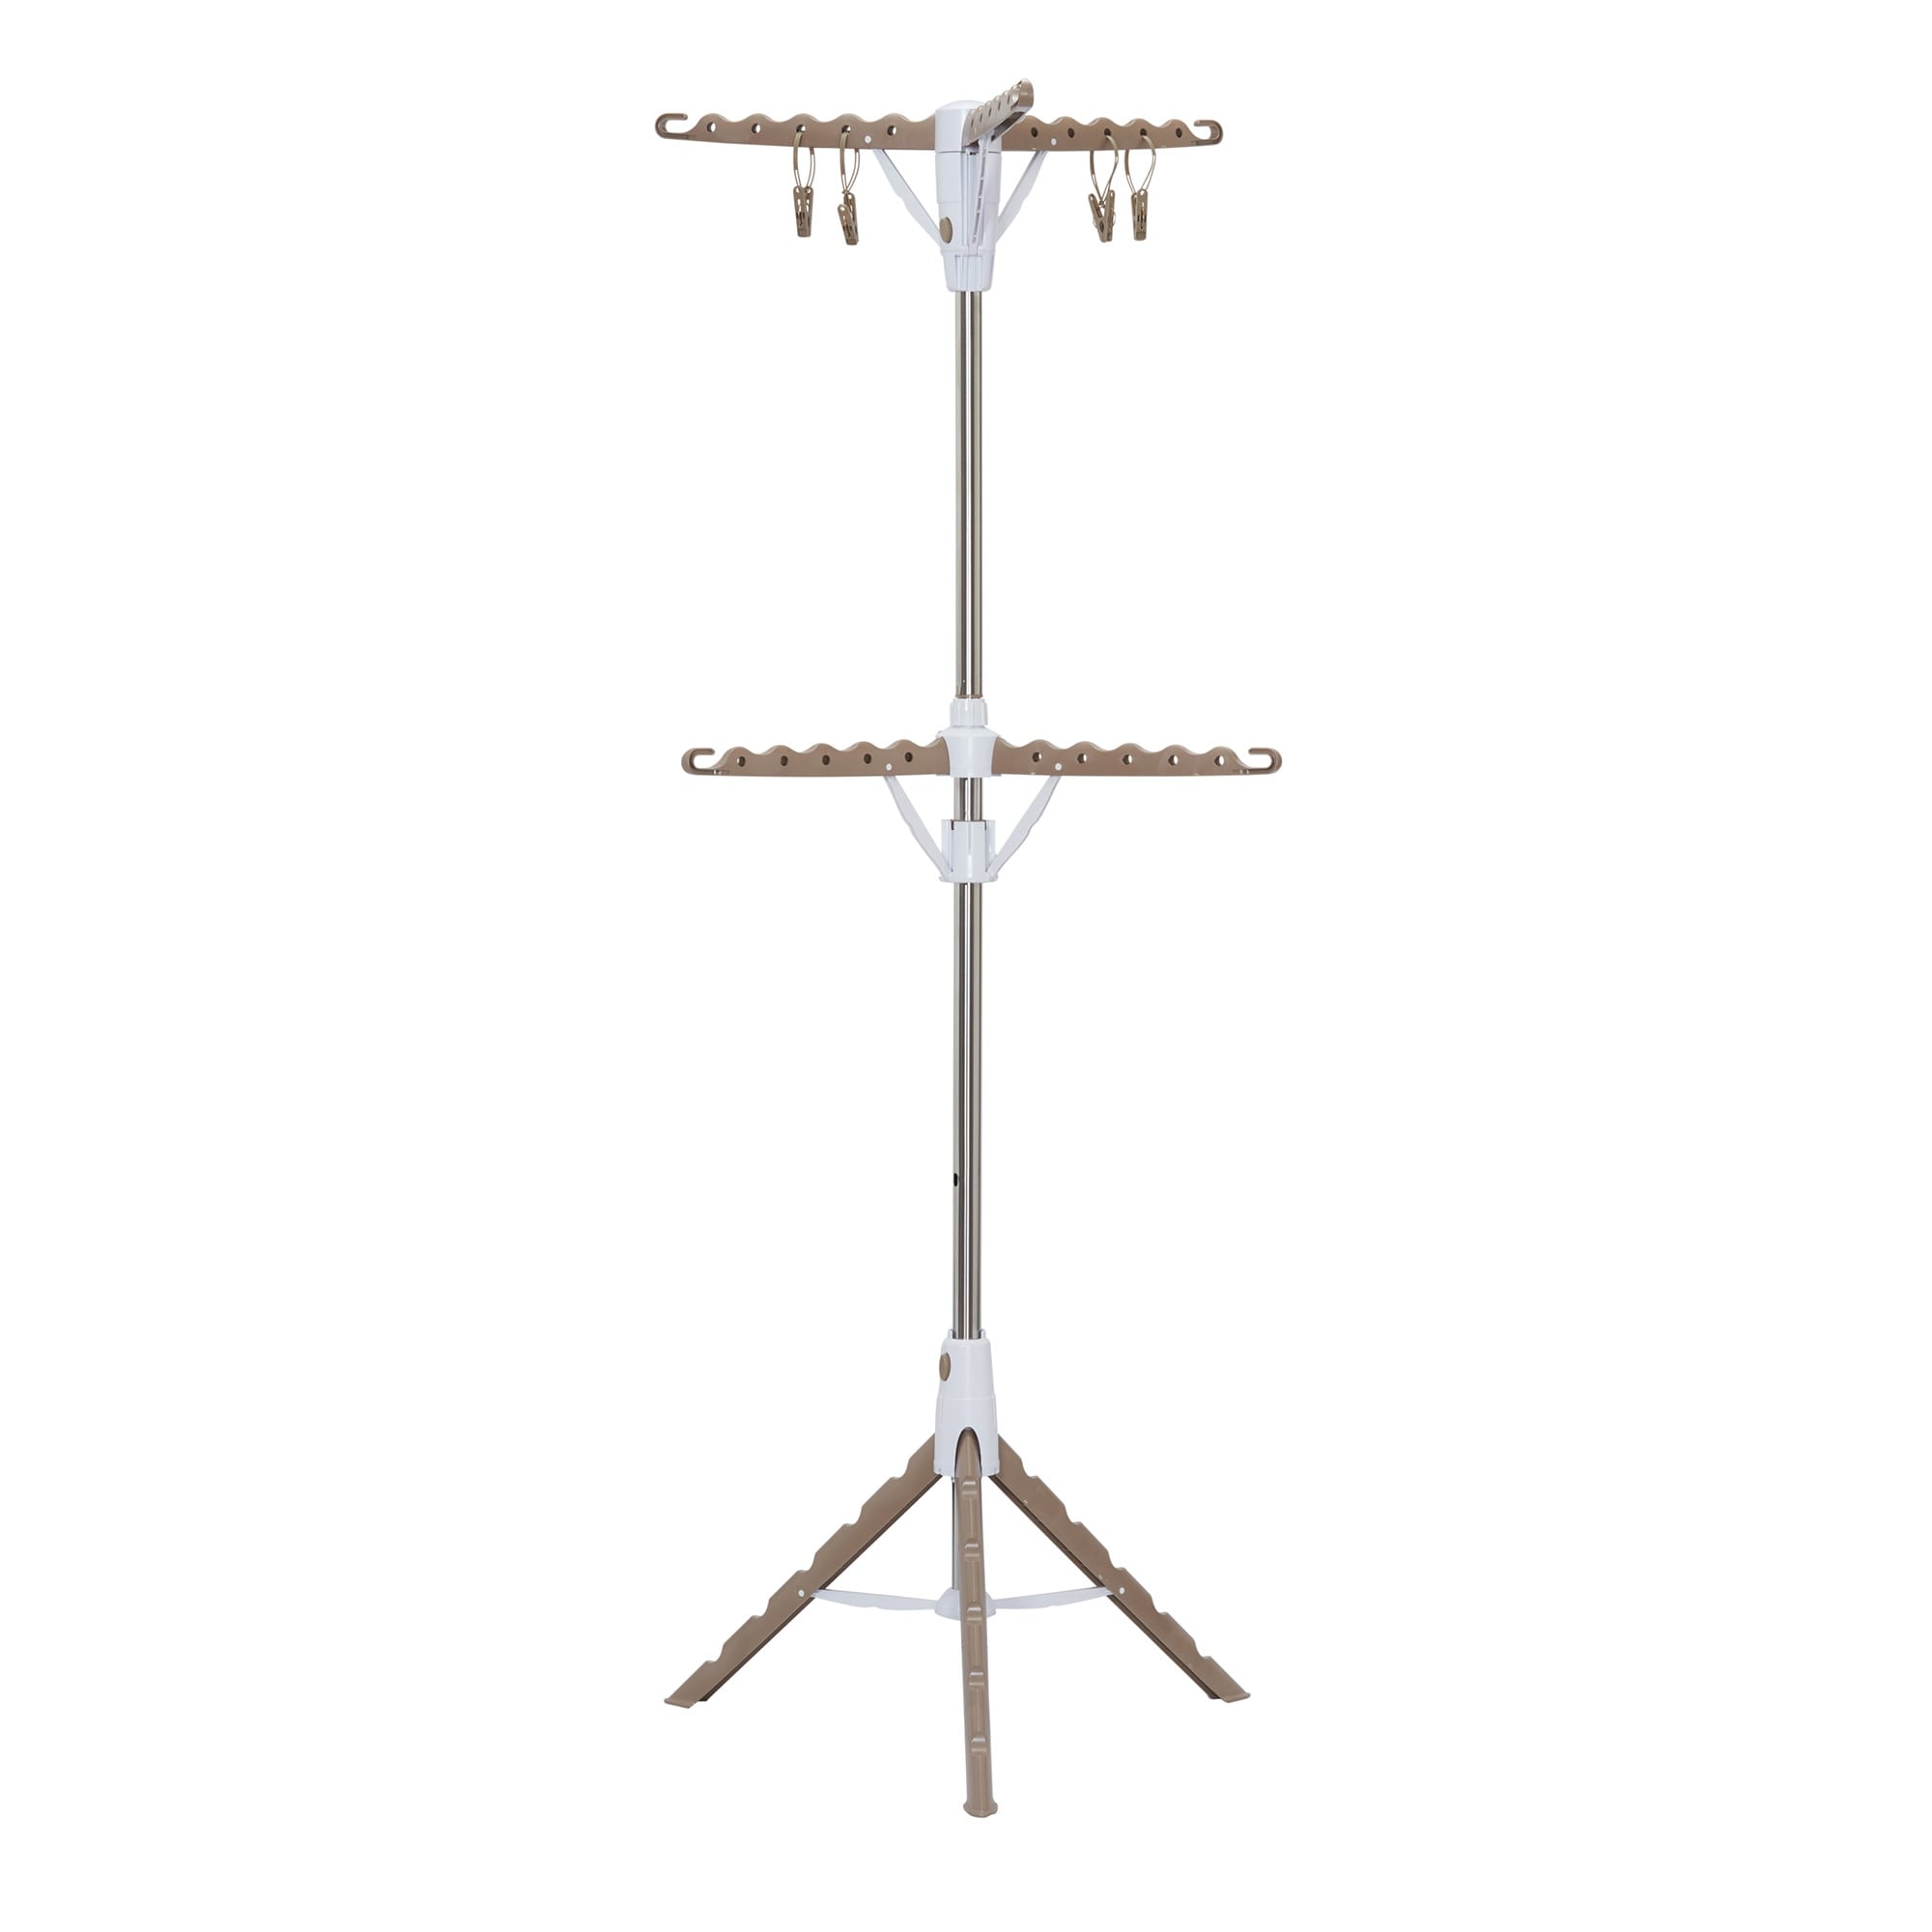 https://ak1.ostkcdn.com/images/products/is/images/direct/a7f2a3430e13537dba3ffc41e7048cdc26b84812/2-Tier-Tripod-Clothes-Drying-Rack.jpg